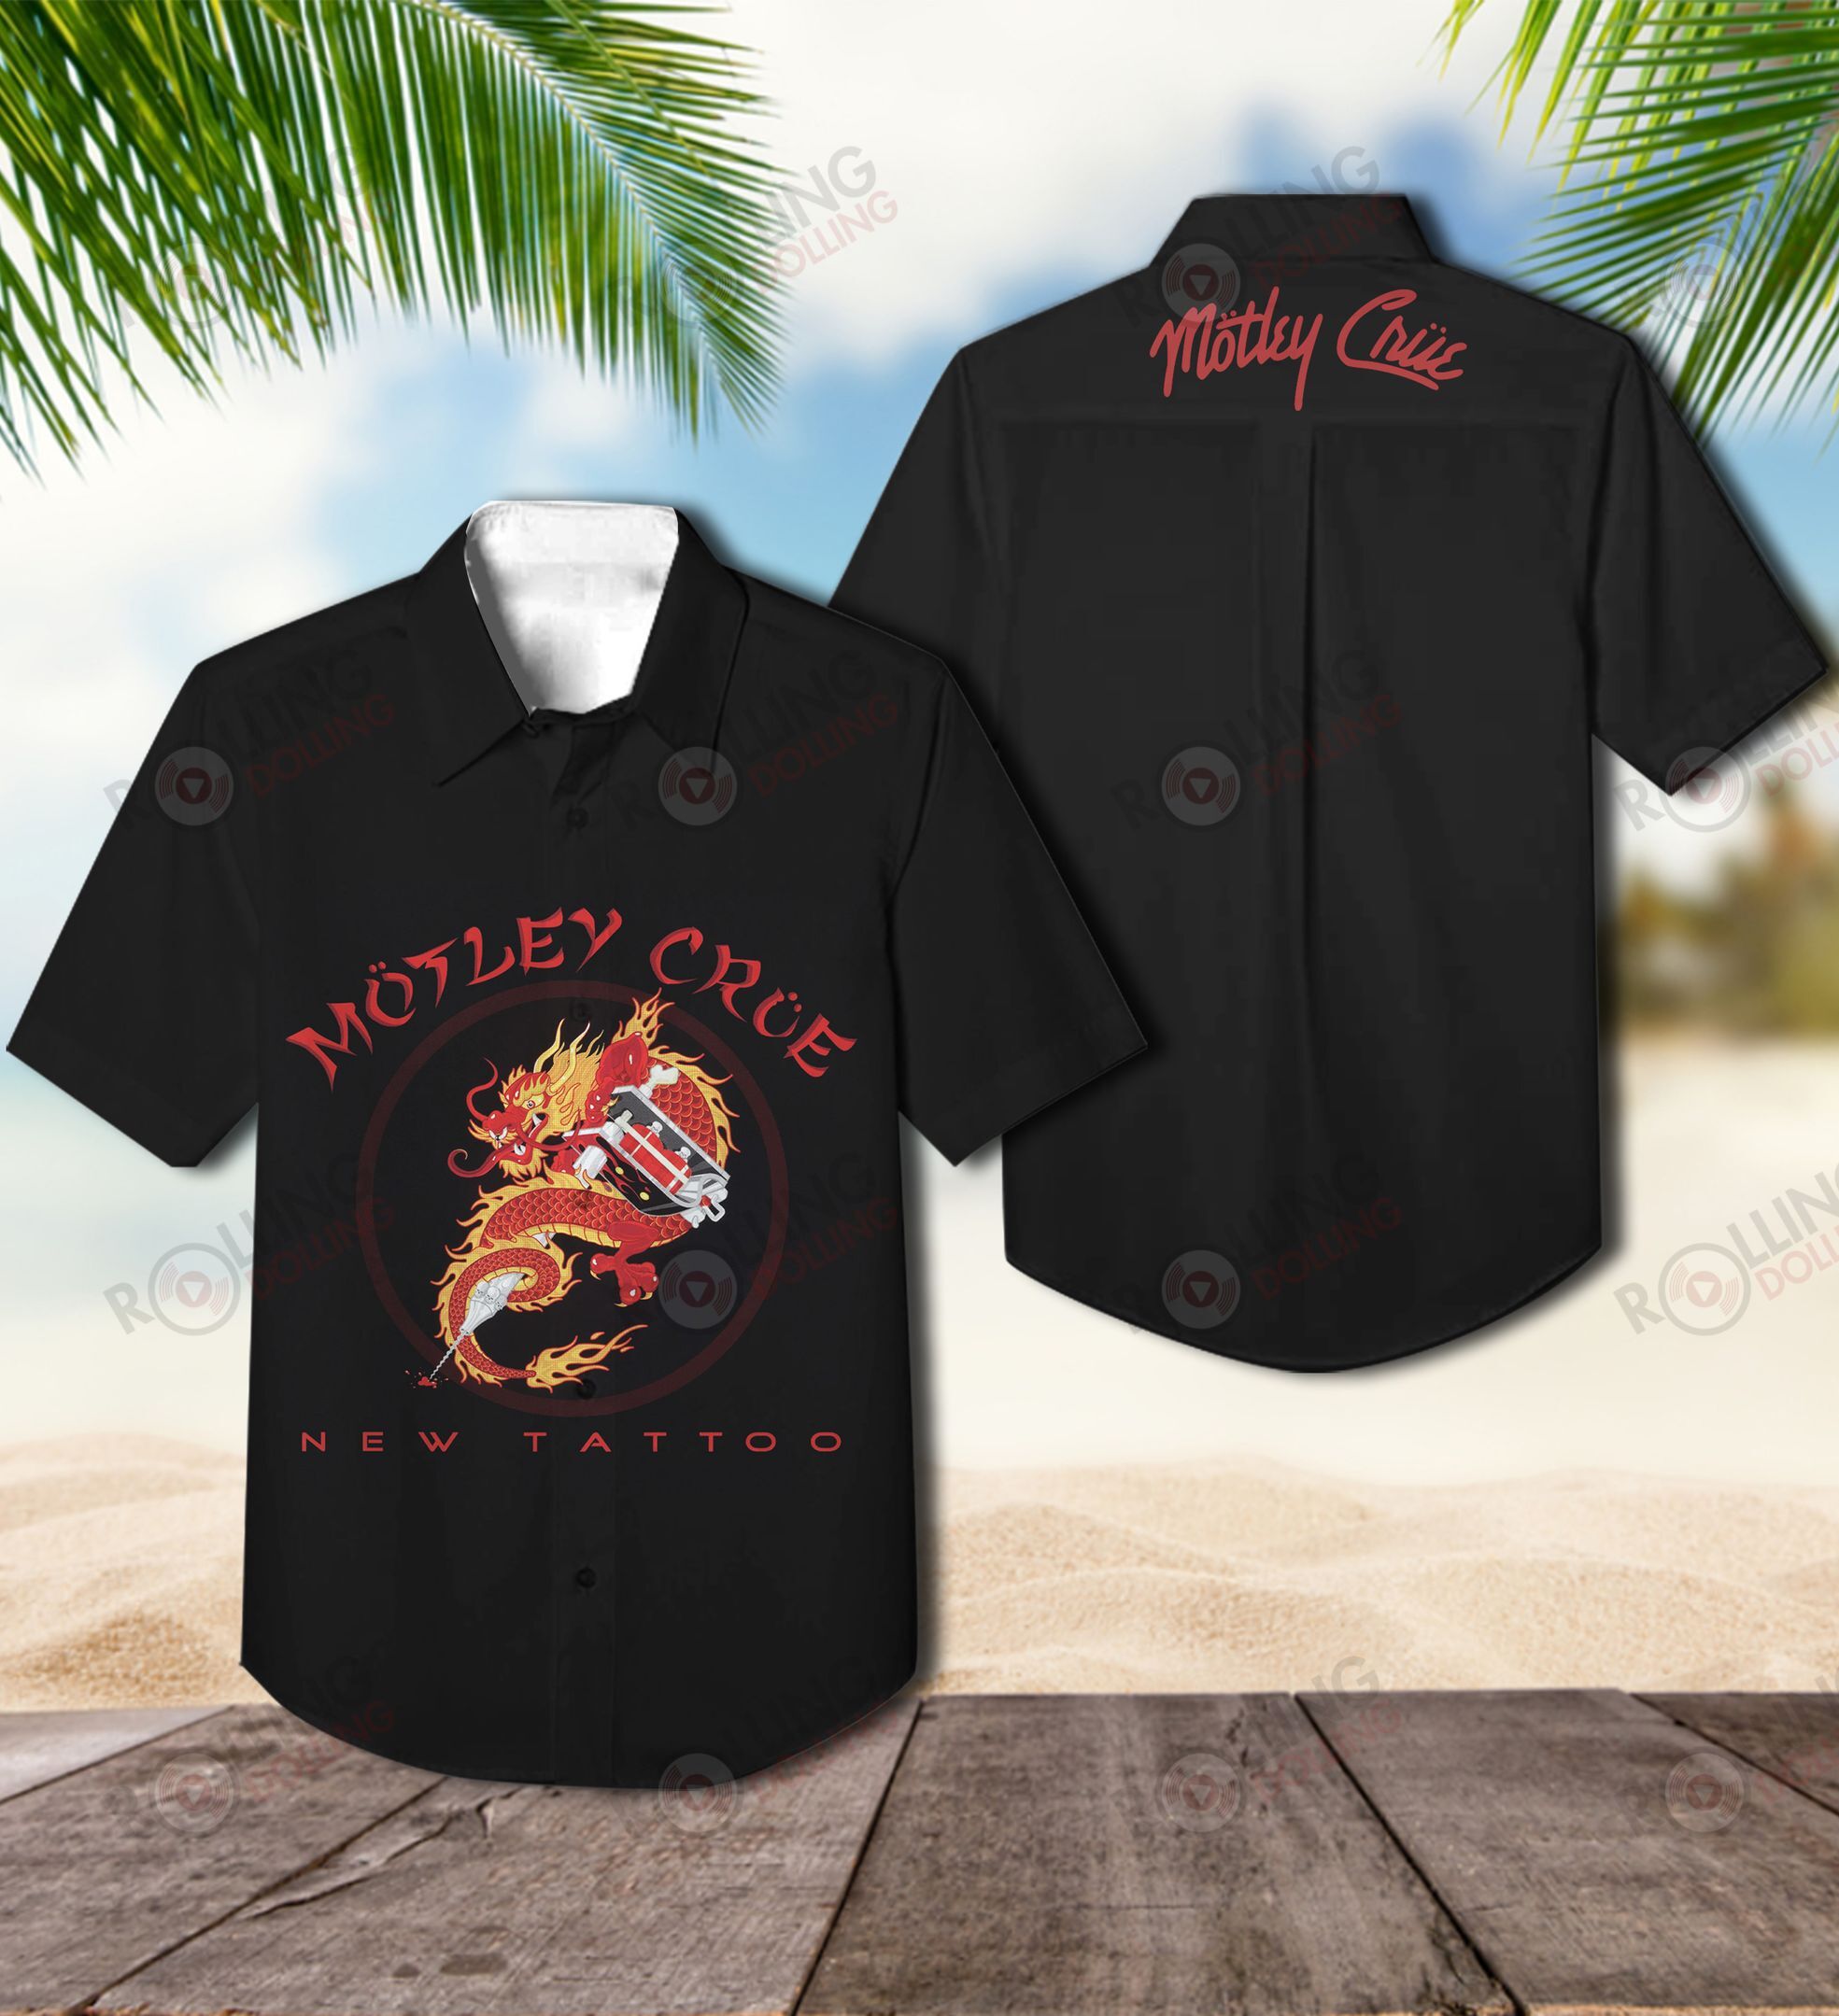 For summer, consider wearing This Amazing Hawaiian Shirt shirt in our store 59